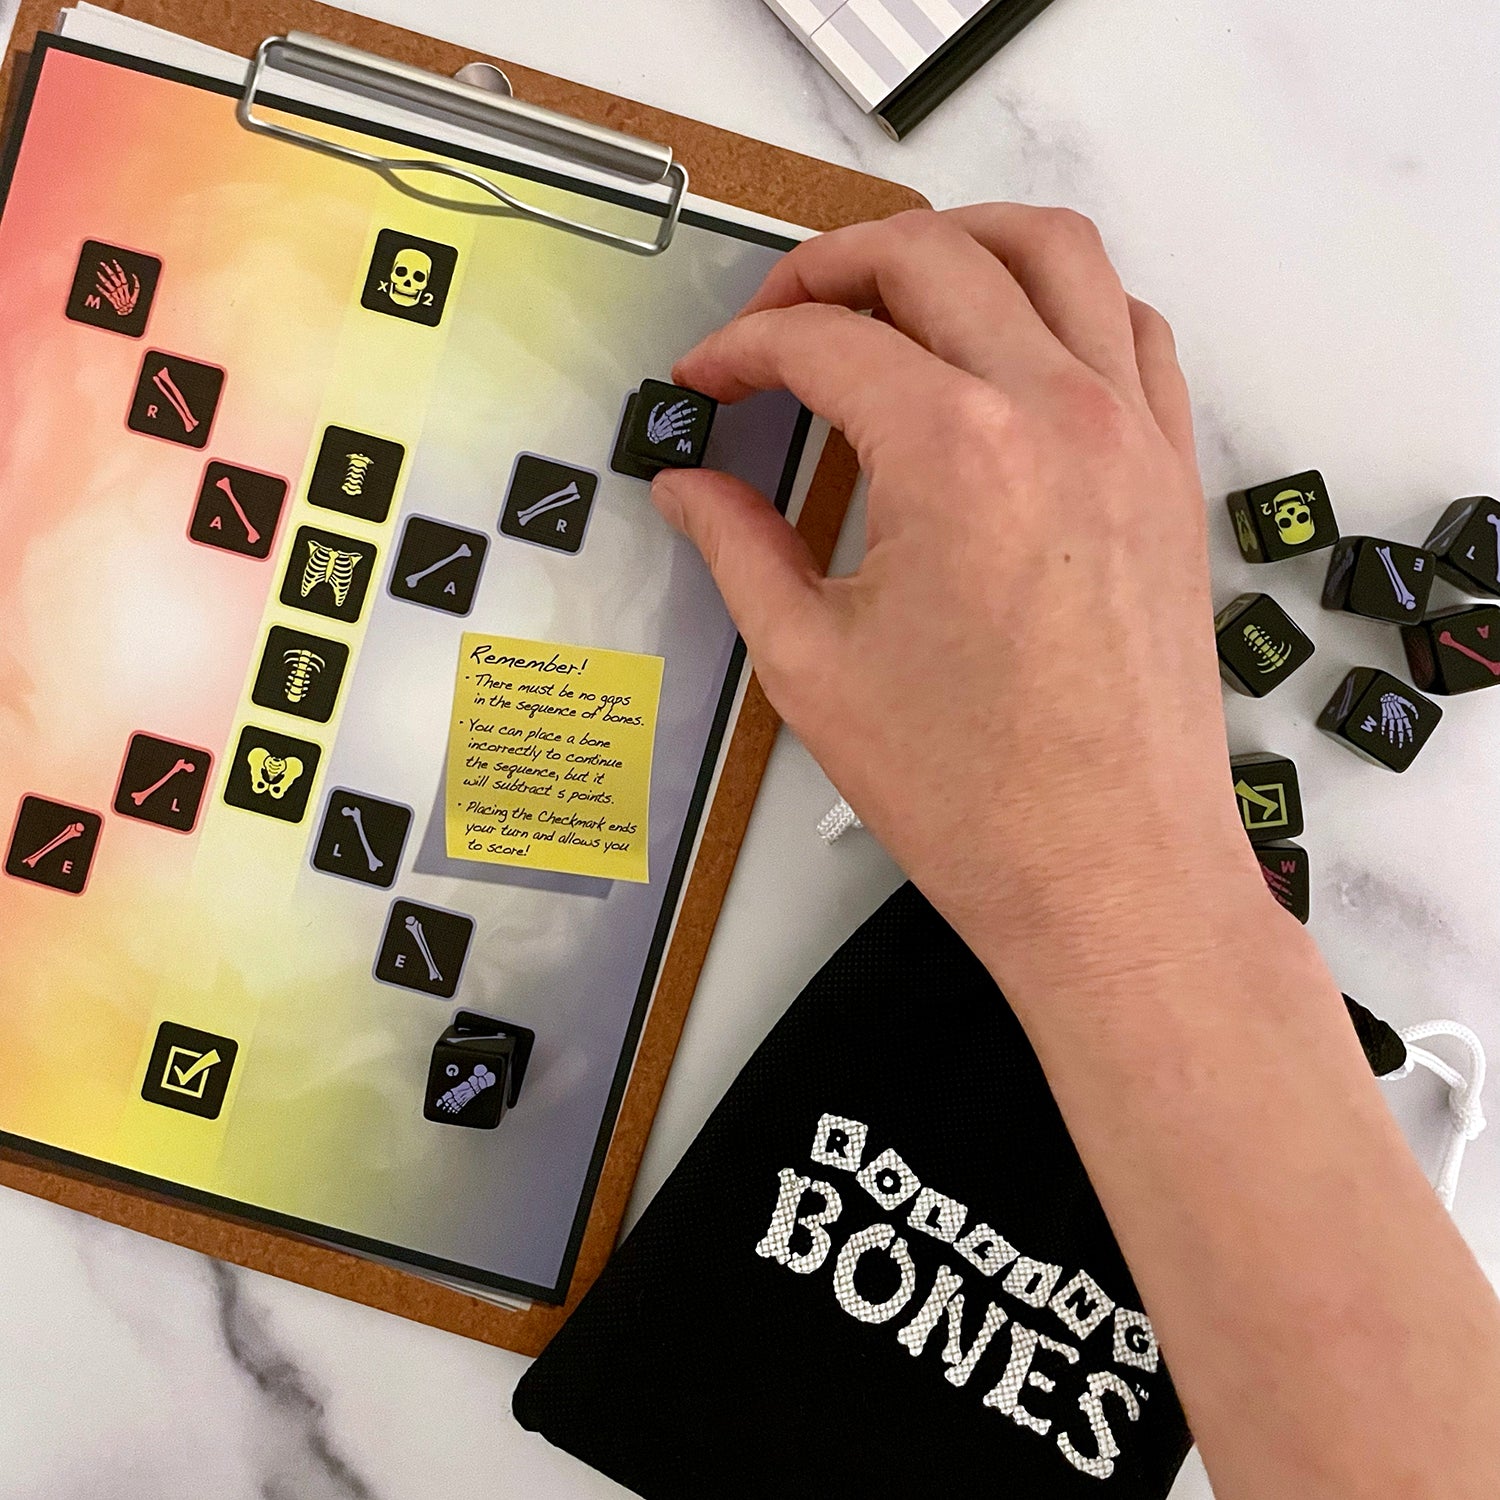 Rolling Bones by SimplyFun is a game that gives you hands-on introduction to anatomy, for ages 7 and up.